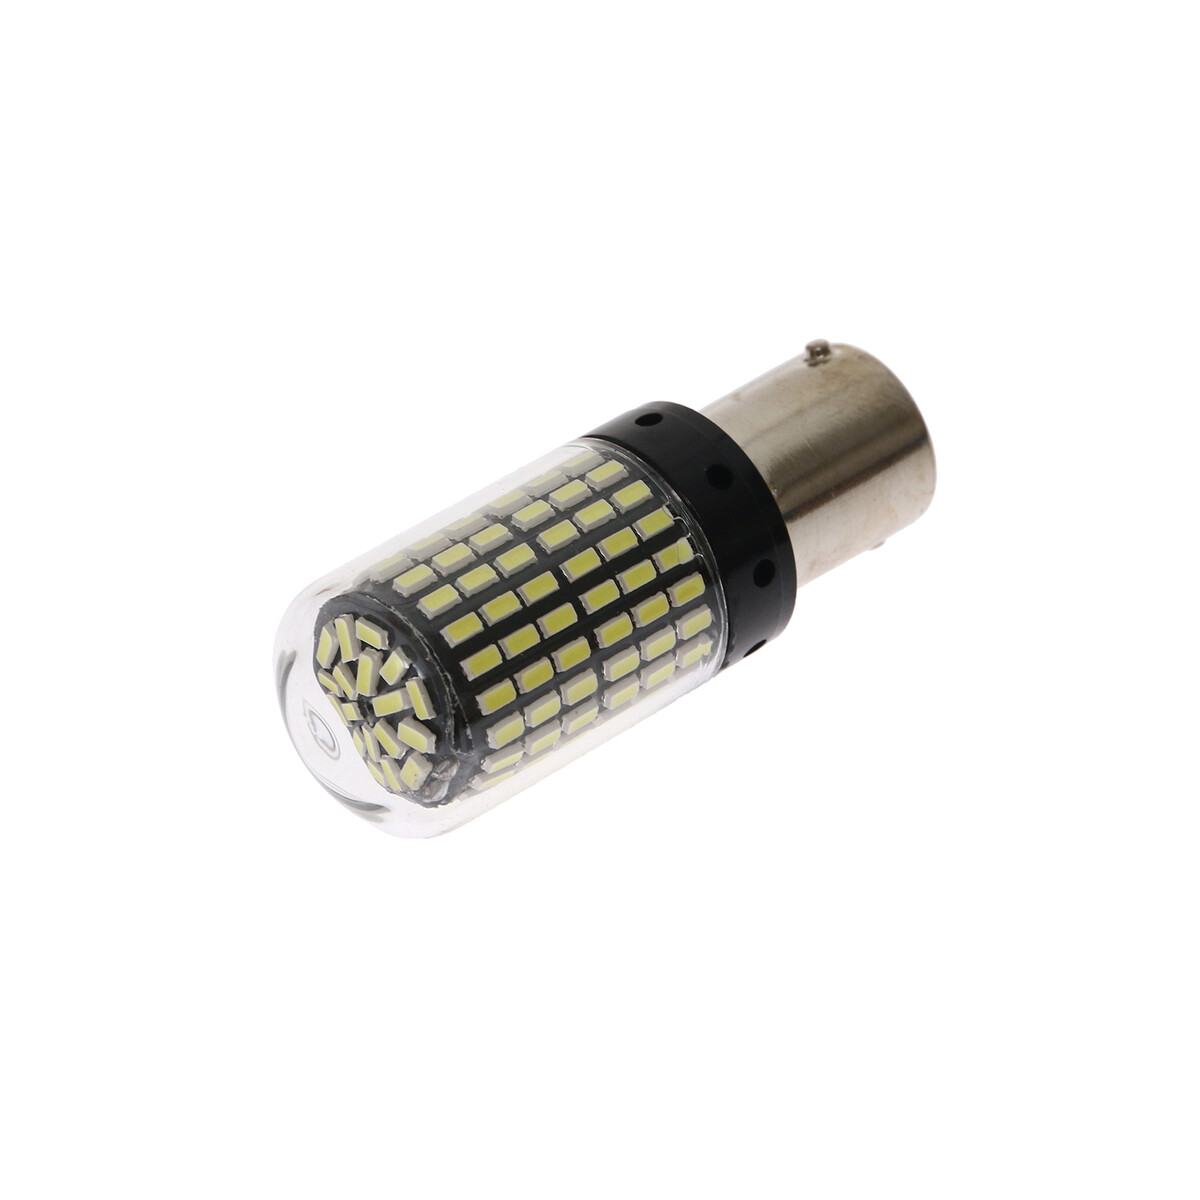   p21w 1156, 144 smd, 12 , canbus,  